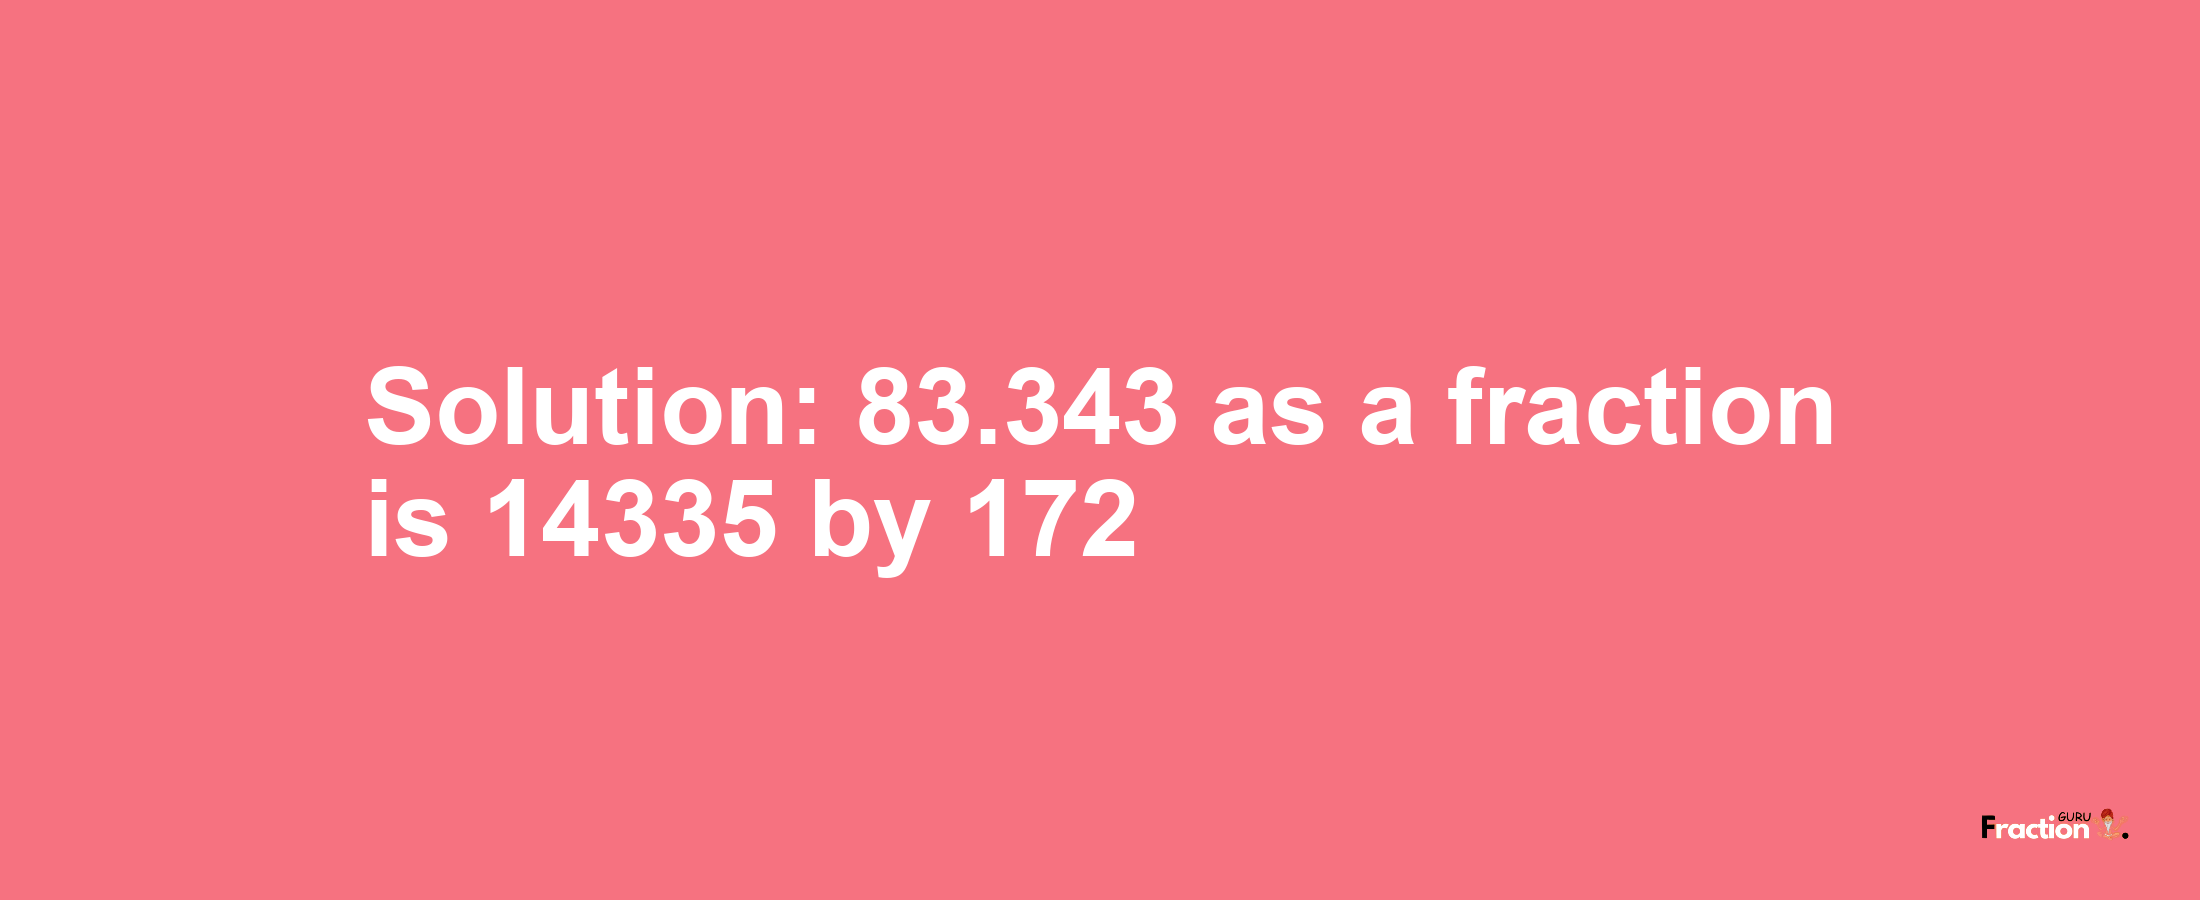 Solution:83.343 as a fraction is 14335/172